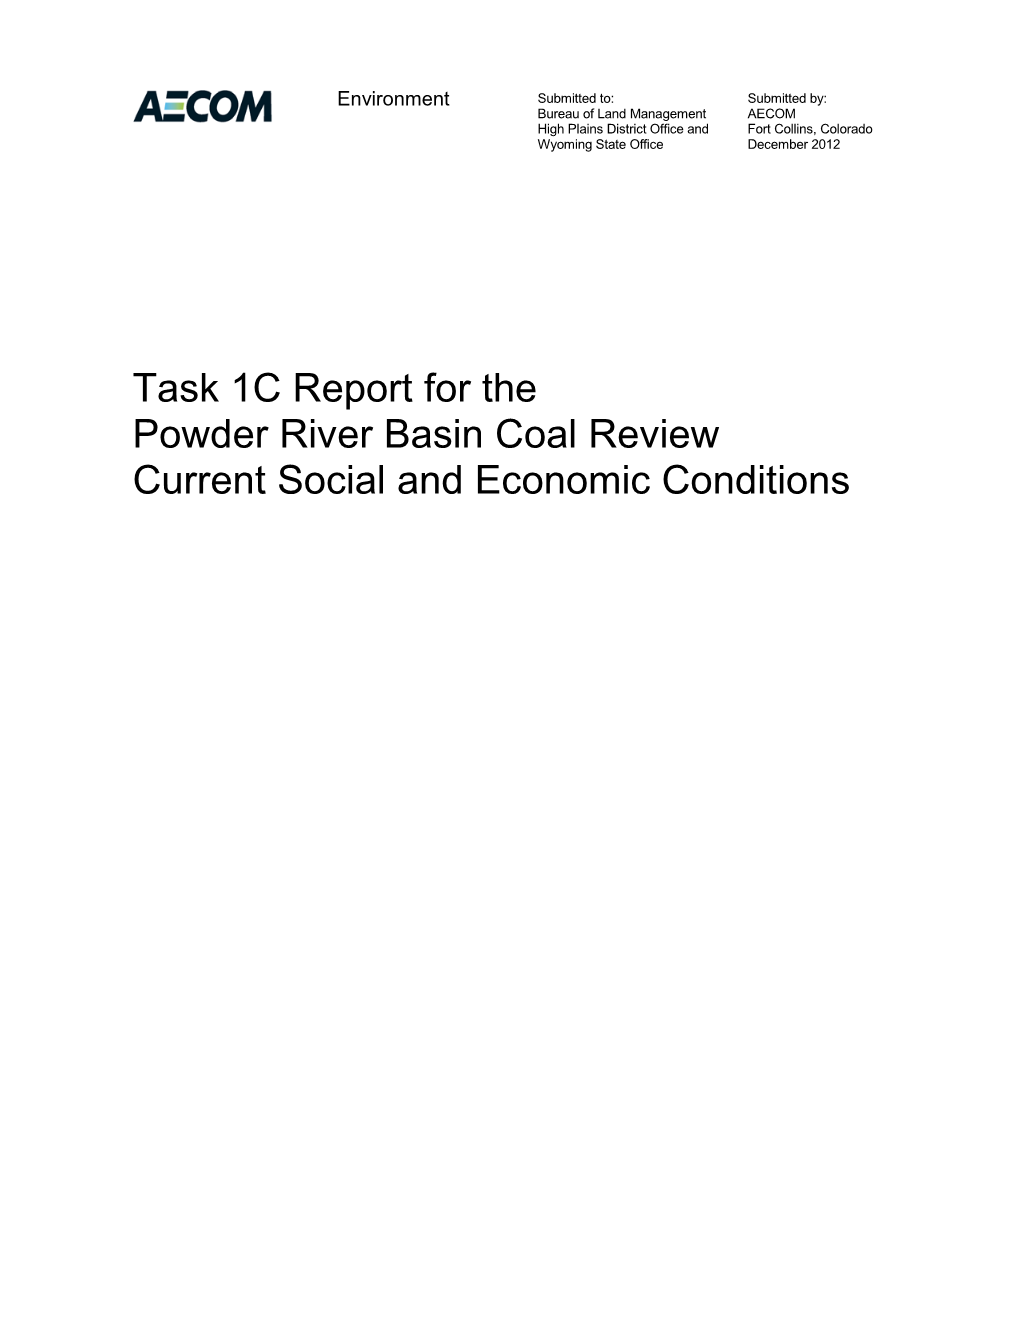 Task 1C Report for the Powder River Basin Coal Review Current Social and Economic Conditions